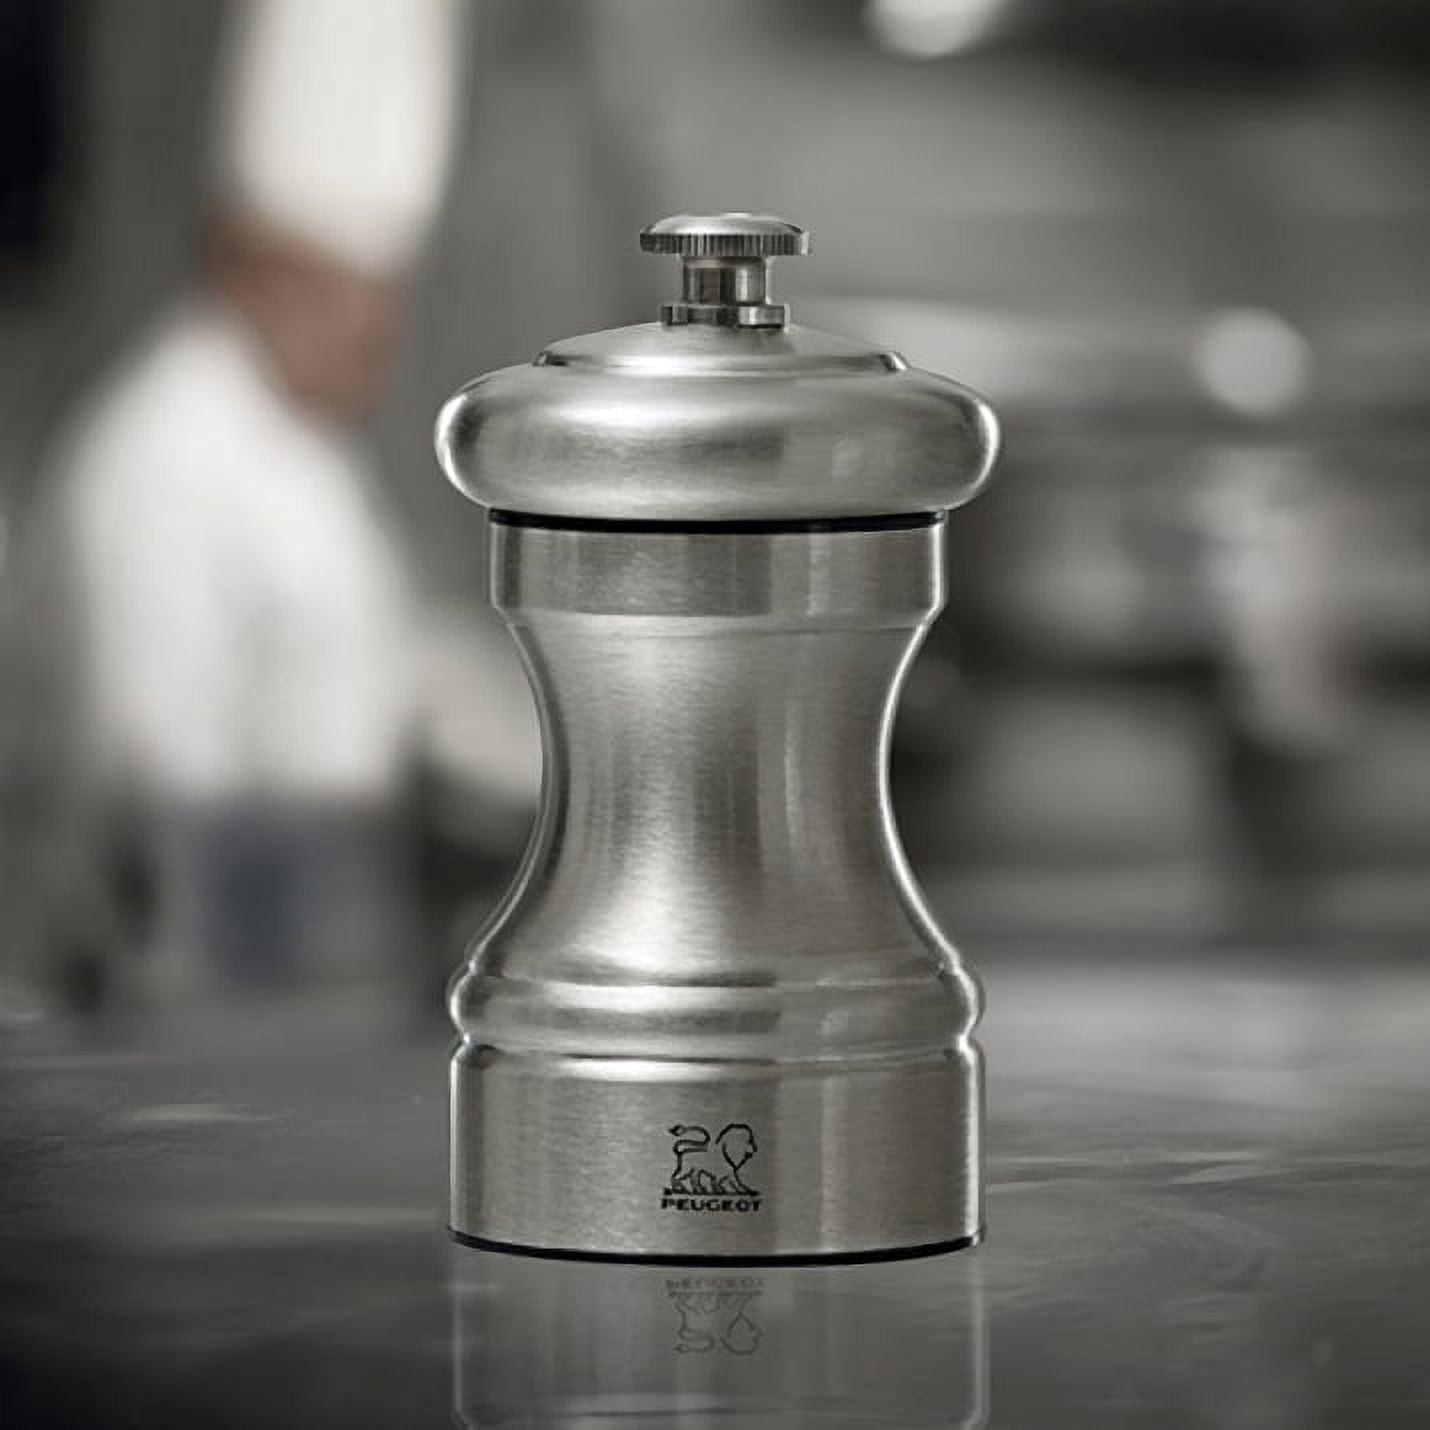 Peugeot touch electric pepper mill - Planet Chef Foodservice Equipment